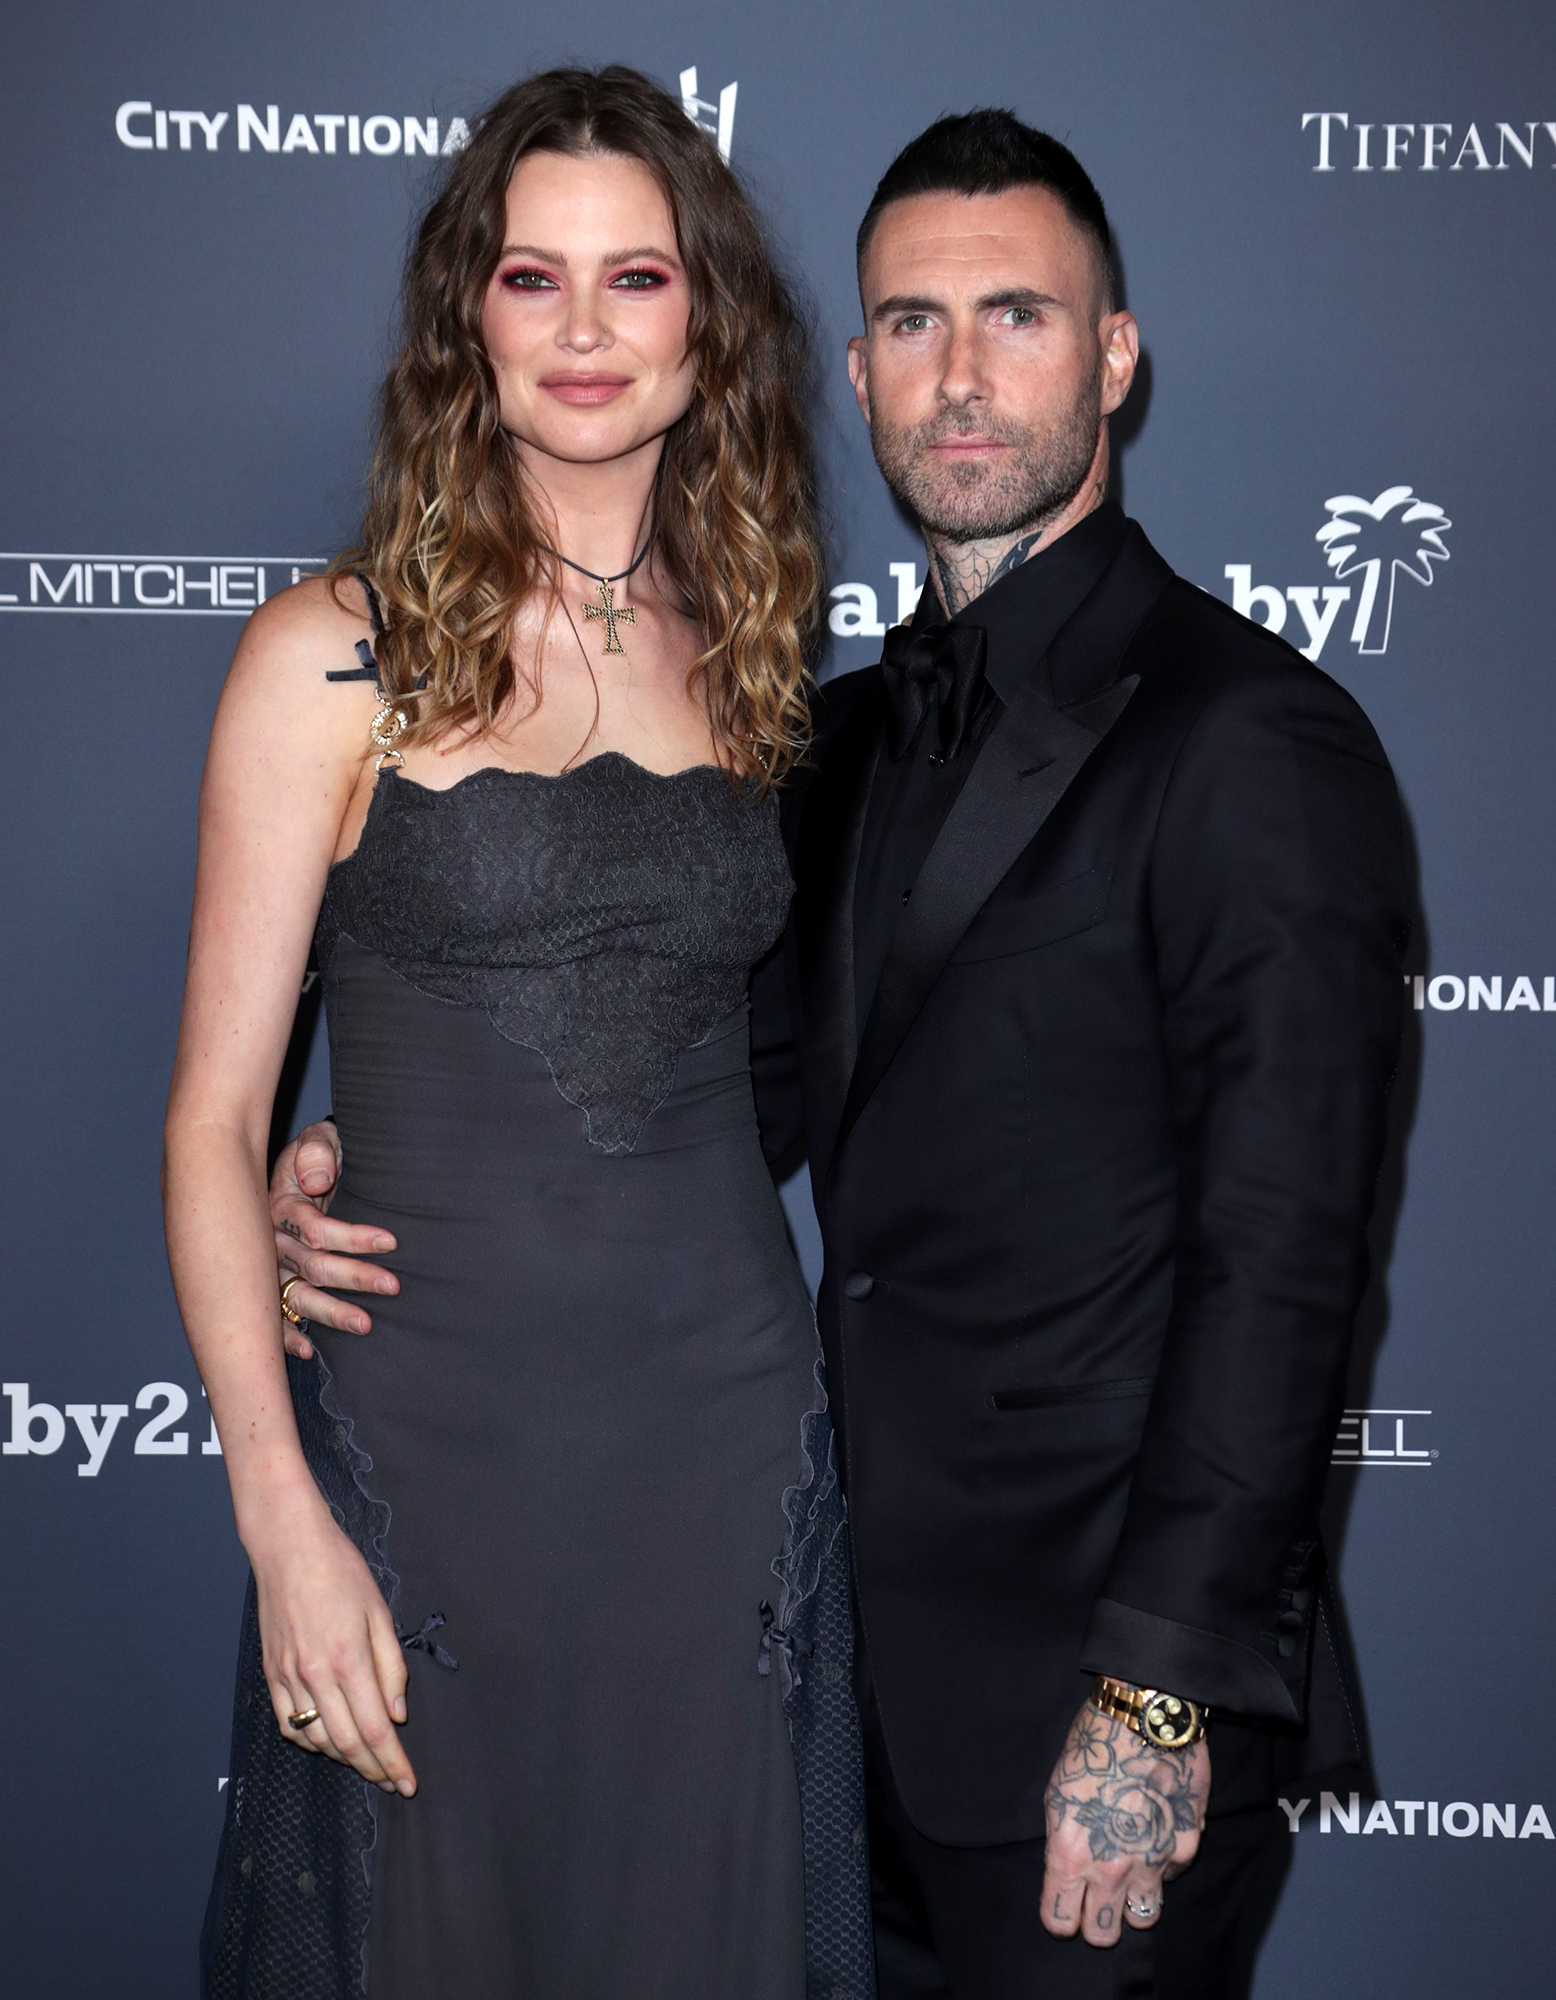 Adam Levine Accused of Cheating What to Know About the Women pic